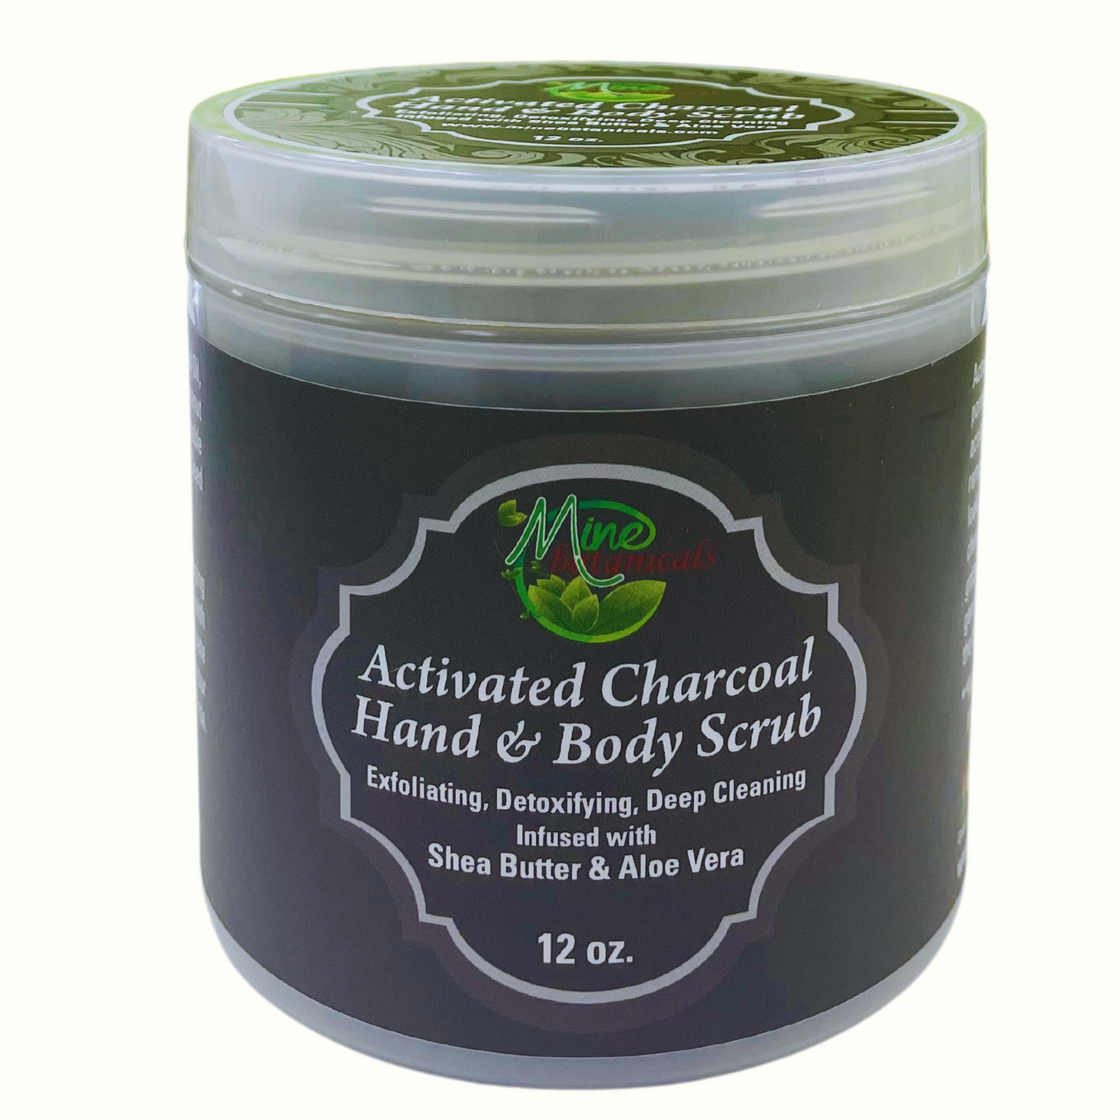 Activated Charcoal Body Scrub Infused with Shea Butter & Aloe Vera